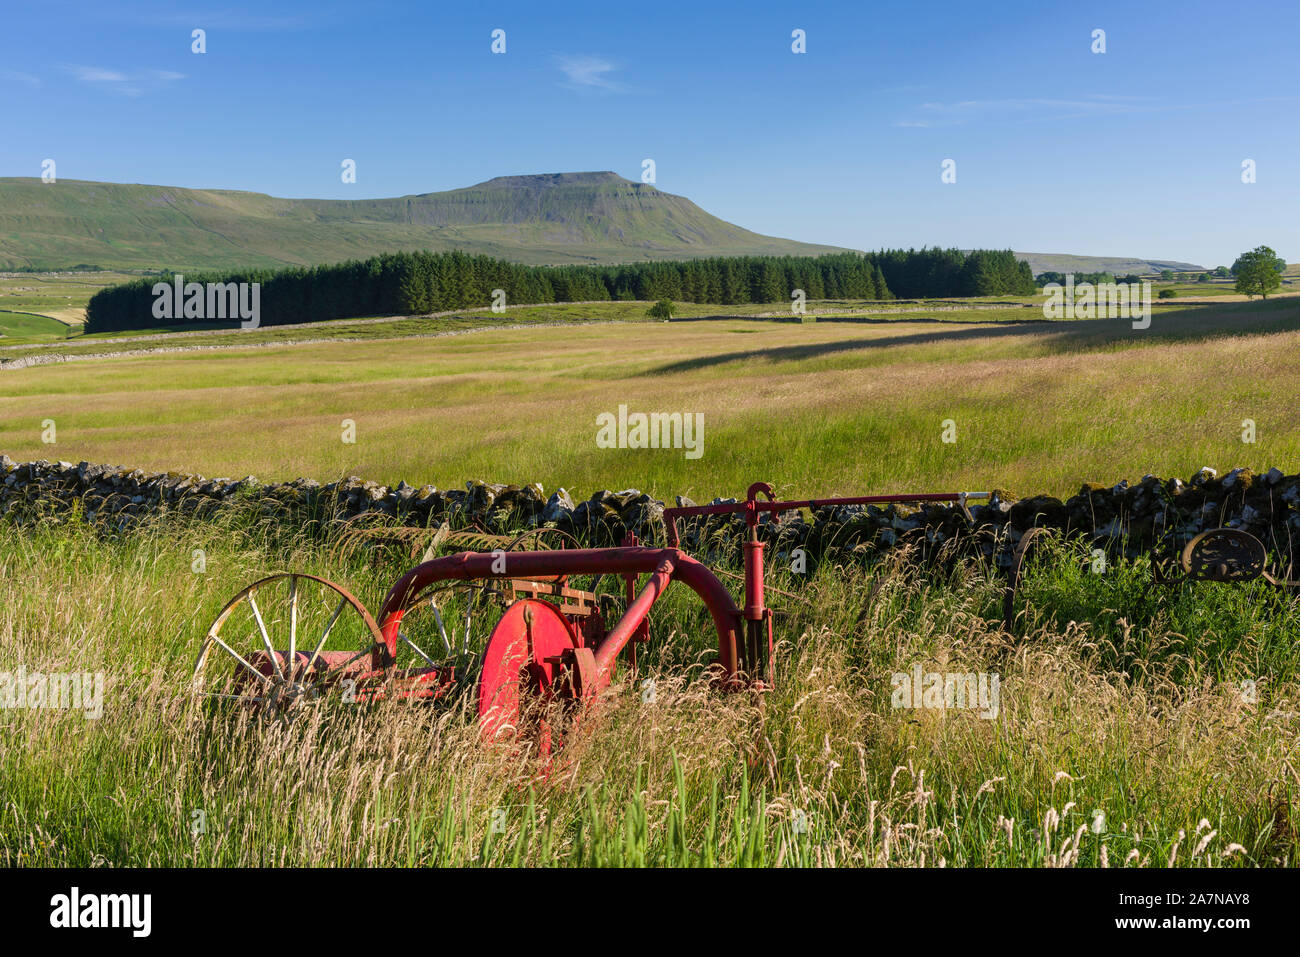 Farm machinery at the edge of a field in the Yorkshire Dales National Park with Ingleborough in the distance. Stock Photo